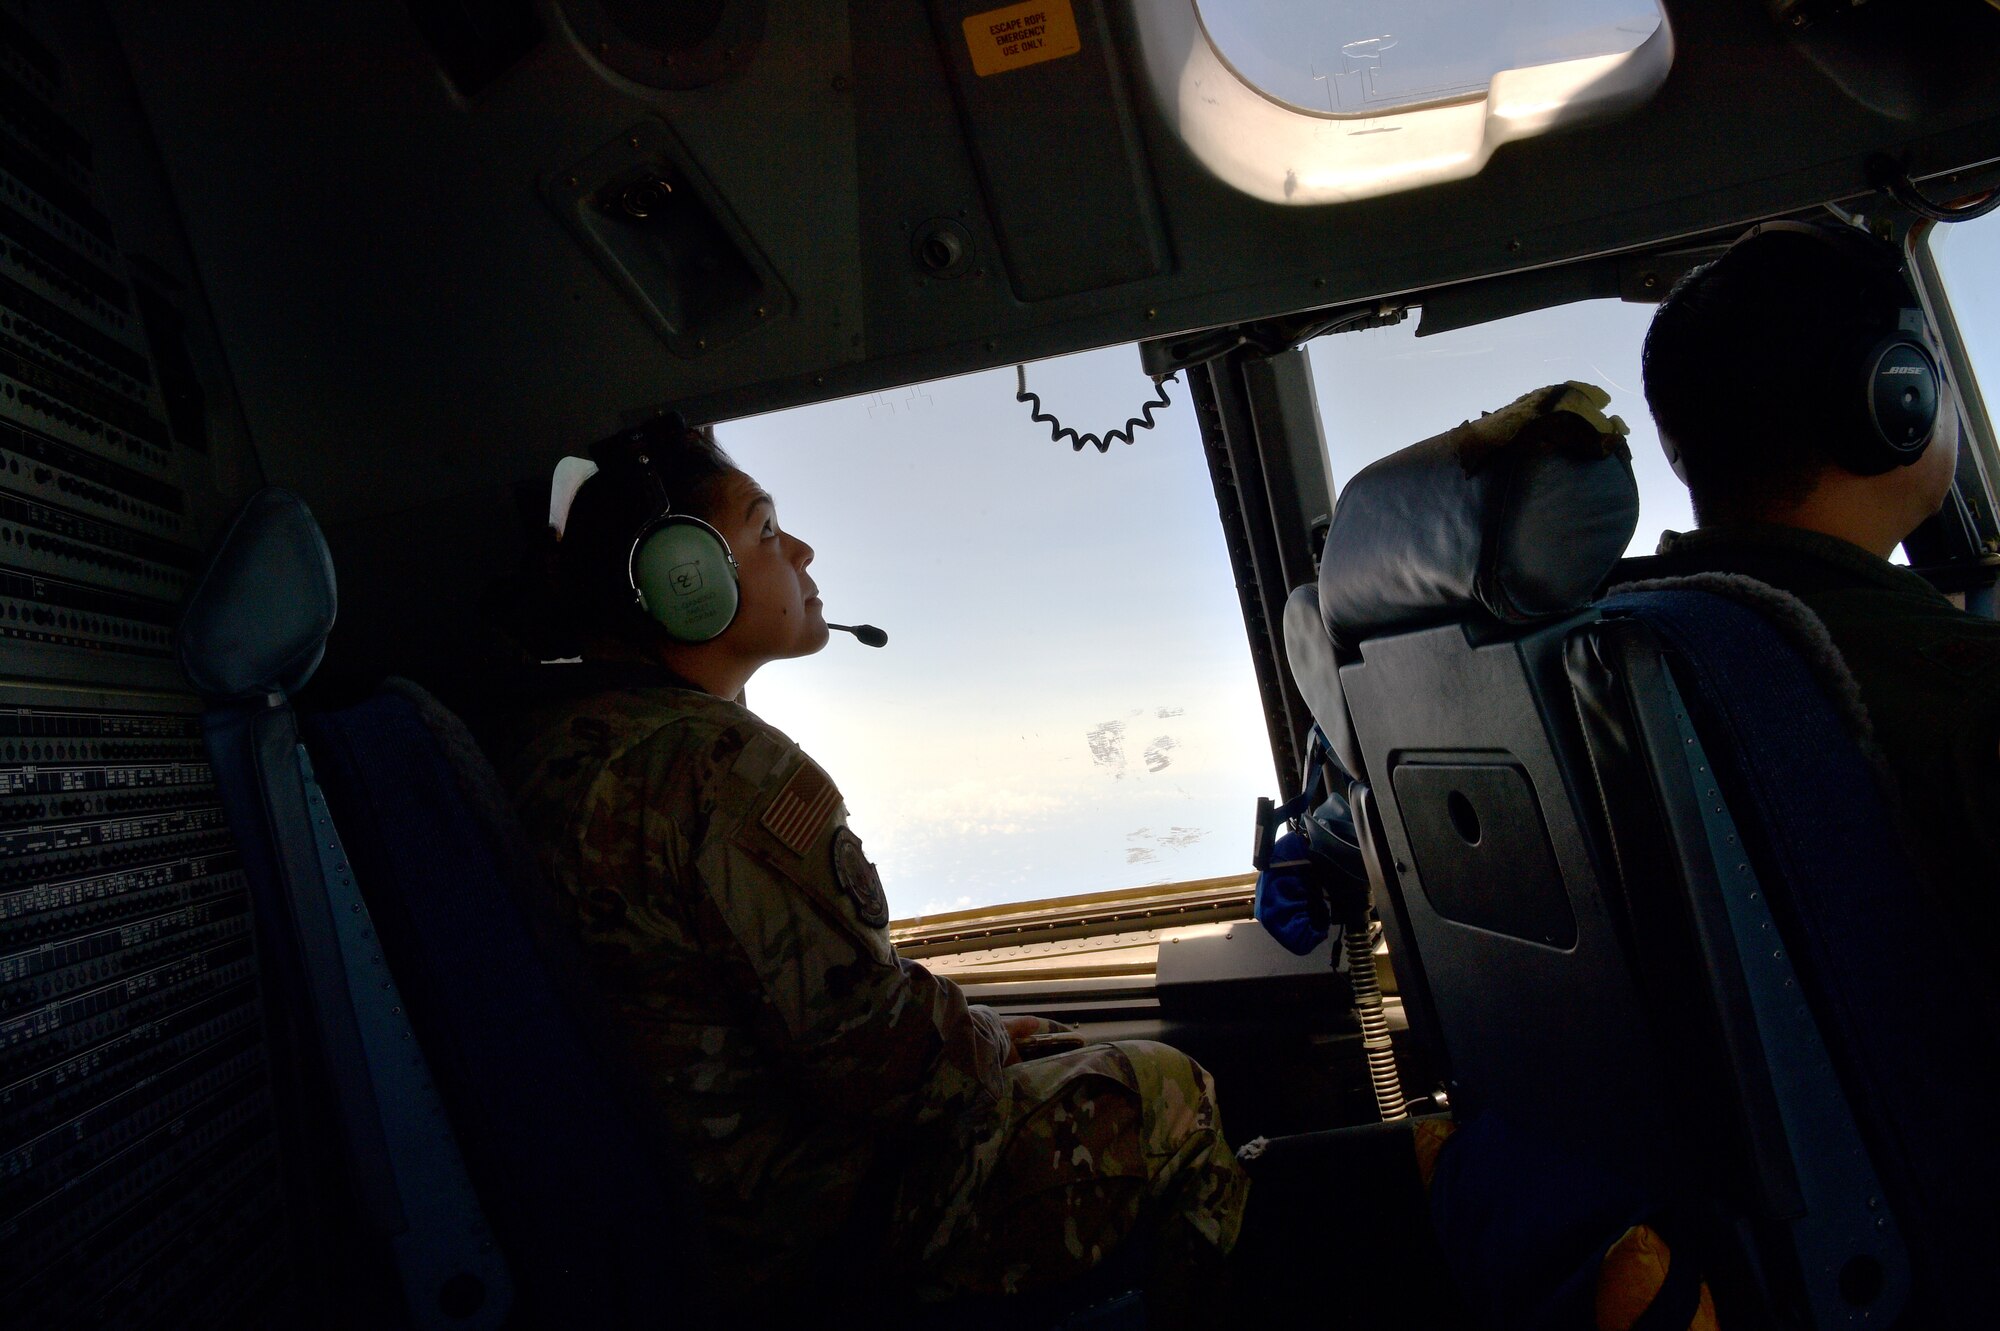 Airman 1st Class Taylor Ganeko, 154th Maintenance Group avionics technician, observes an aerial refueling from the cockpit of a C-17 during her first flight in a military aircraft above the Hawaiian Islands, May 25, 2021. In honor of Asian American Pacific Islander Heritage Month, the 15th Wing and 154th Wing flew a routine training mission composed with aircrew and maintainers who were all of Asian American or Pacific Islander descent and were a mix of active duty and Air National Guard members. (U.S. Air Force photo by 1st Lt. Amber R. Kelly-Herard)